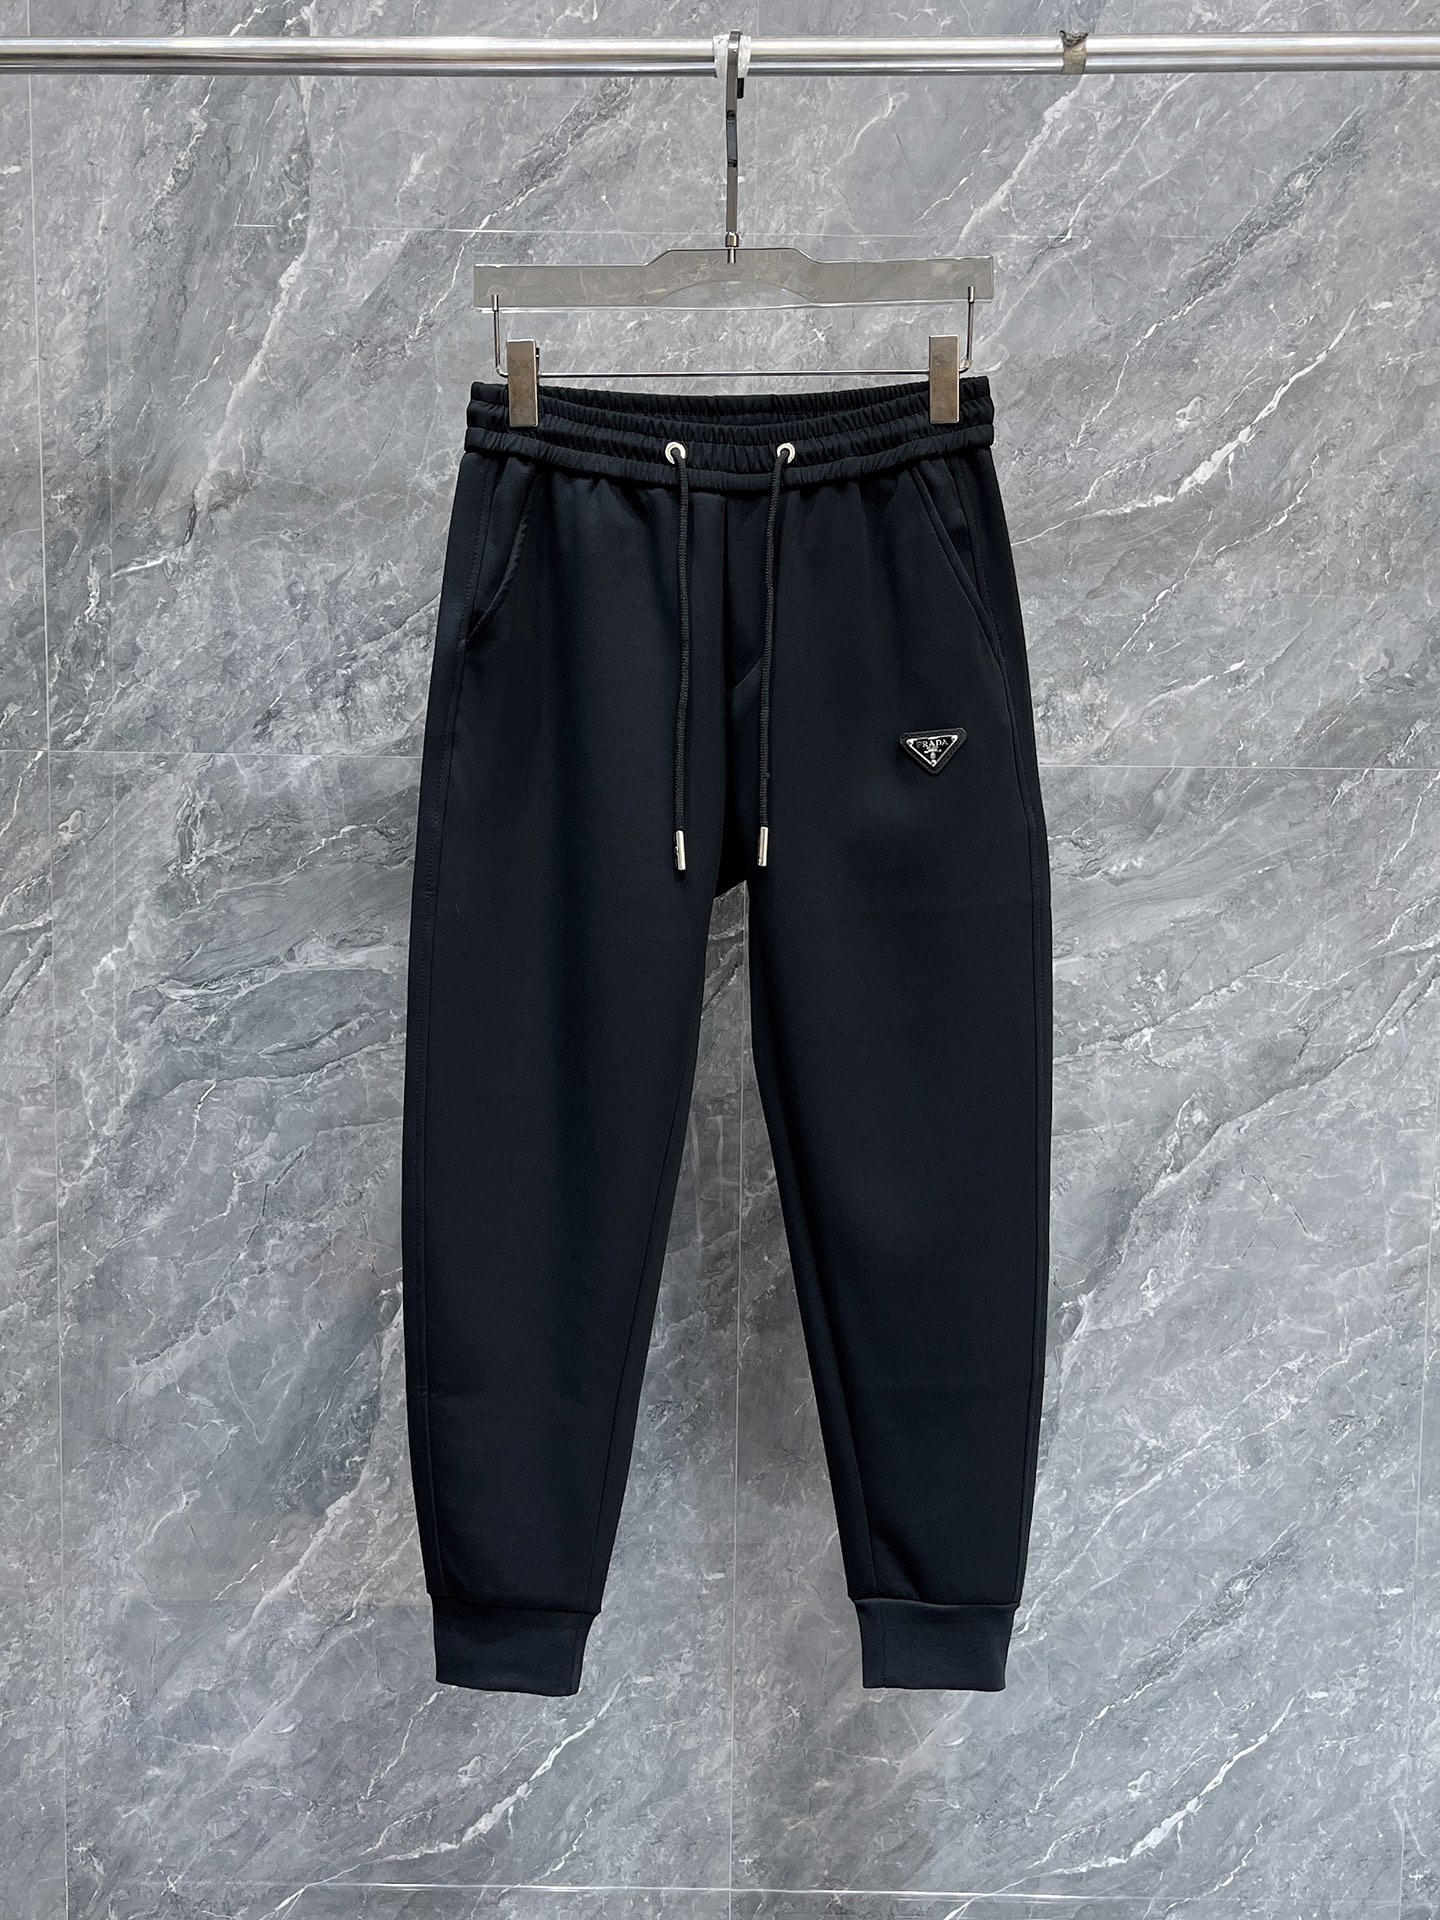 Prada Clothing Pants & Trousers Summer Collection Casual